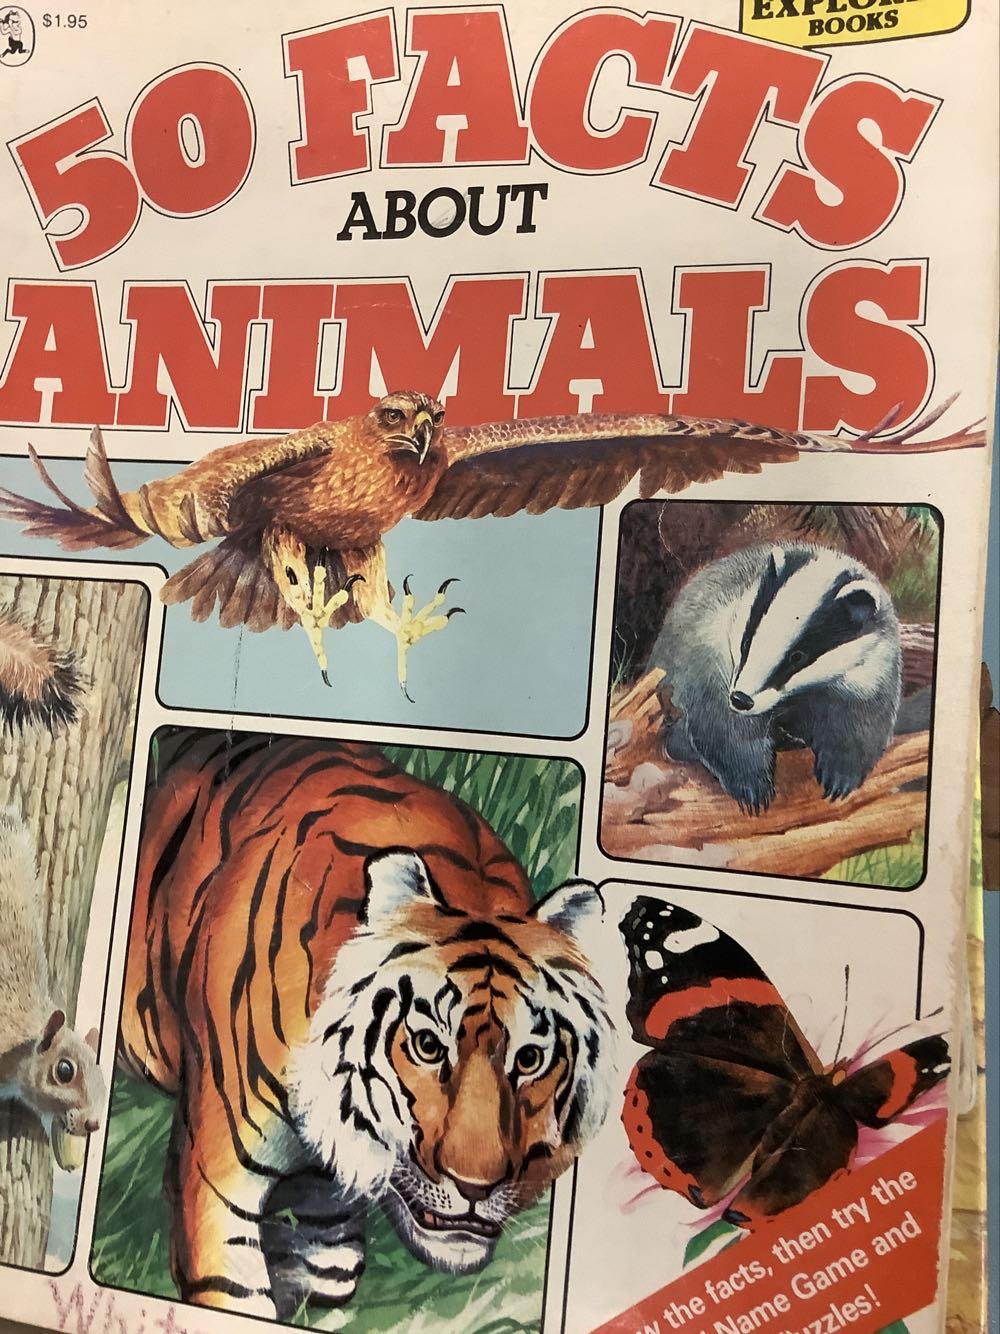 50 Facts About Animals - Ron Taylor book collectible - Main Image 1